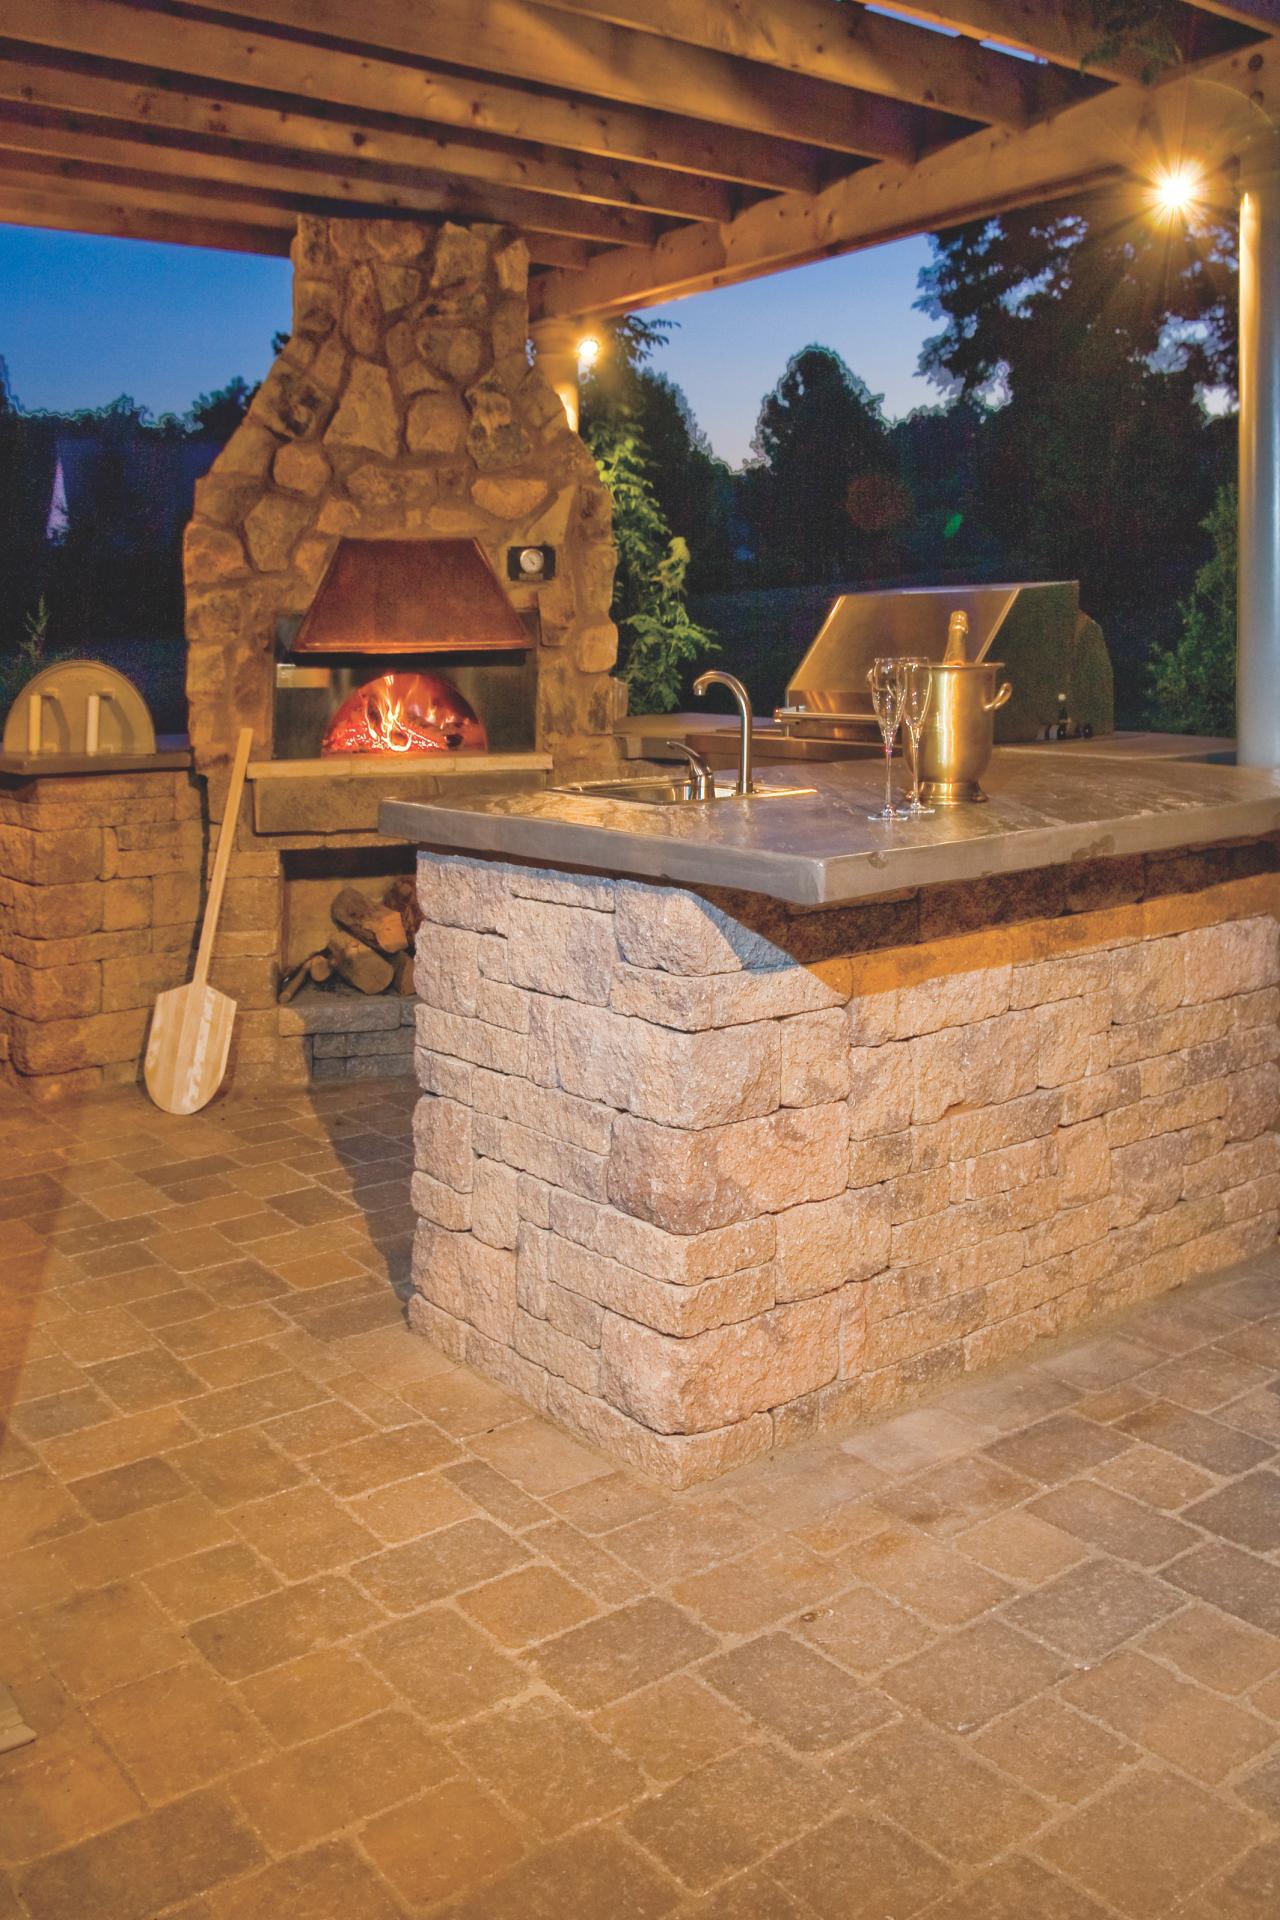 Outdoor Pizza Oven Fireplace Options, Pictures Of Outdoor Fireplaces And Pizza Ovens